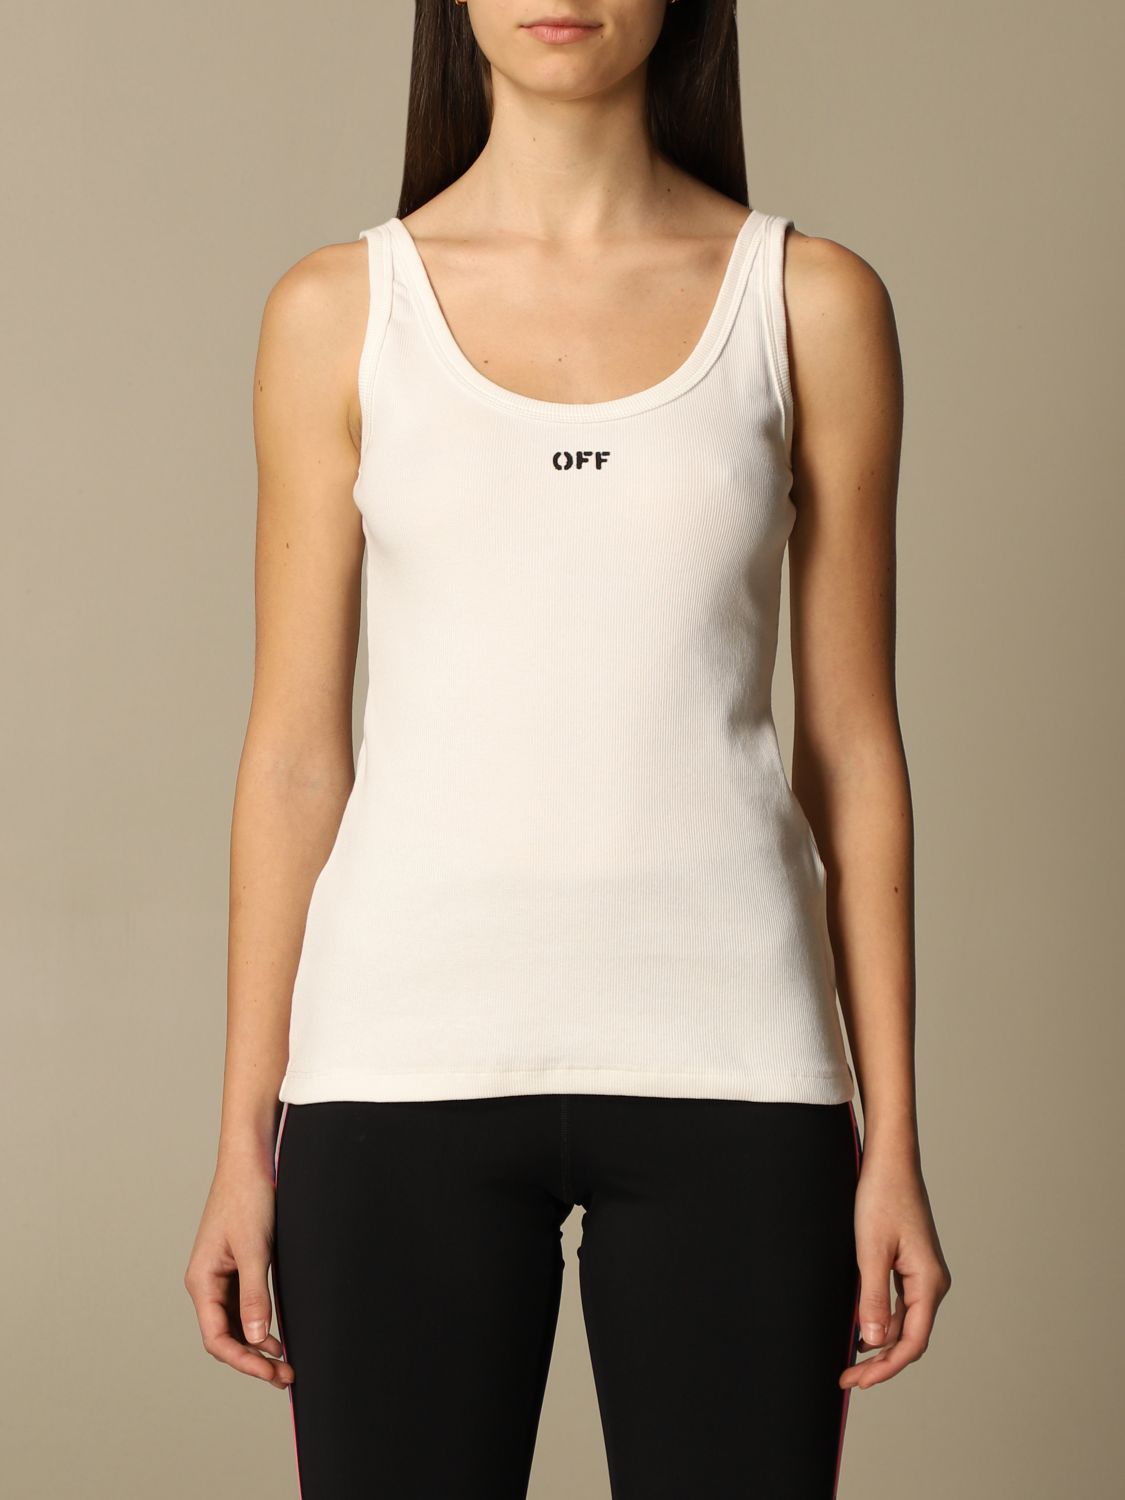 Top Off-White: Top mujer Off White blanco 1